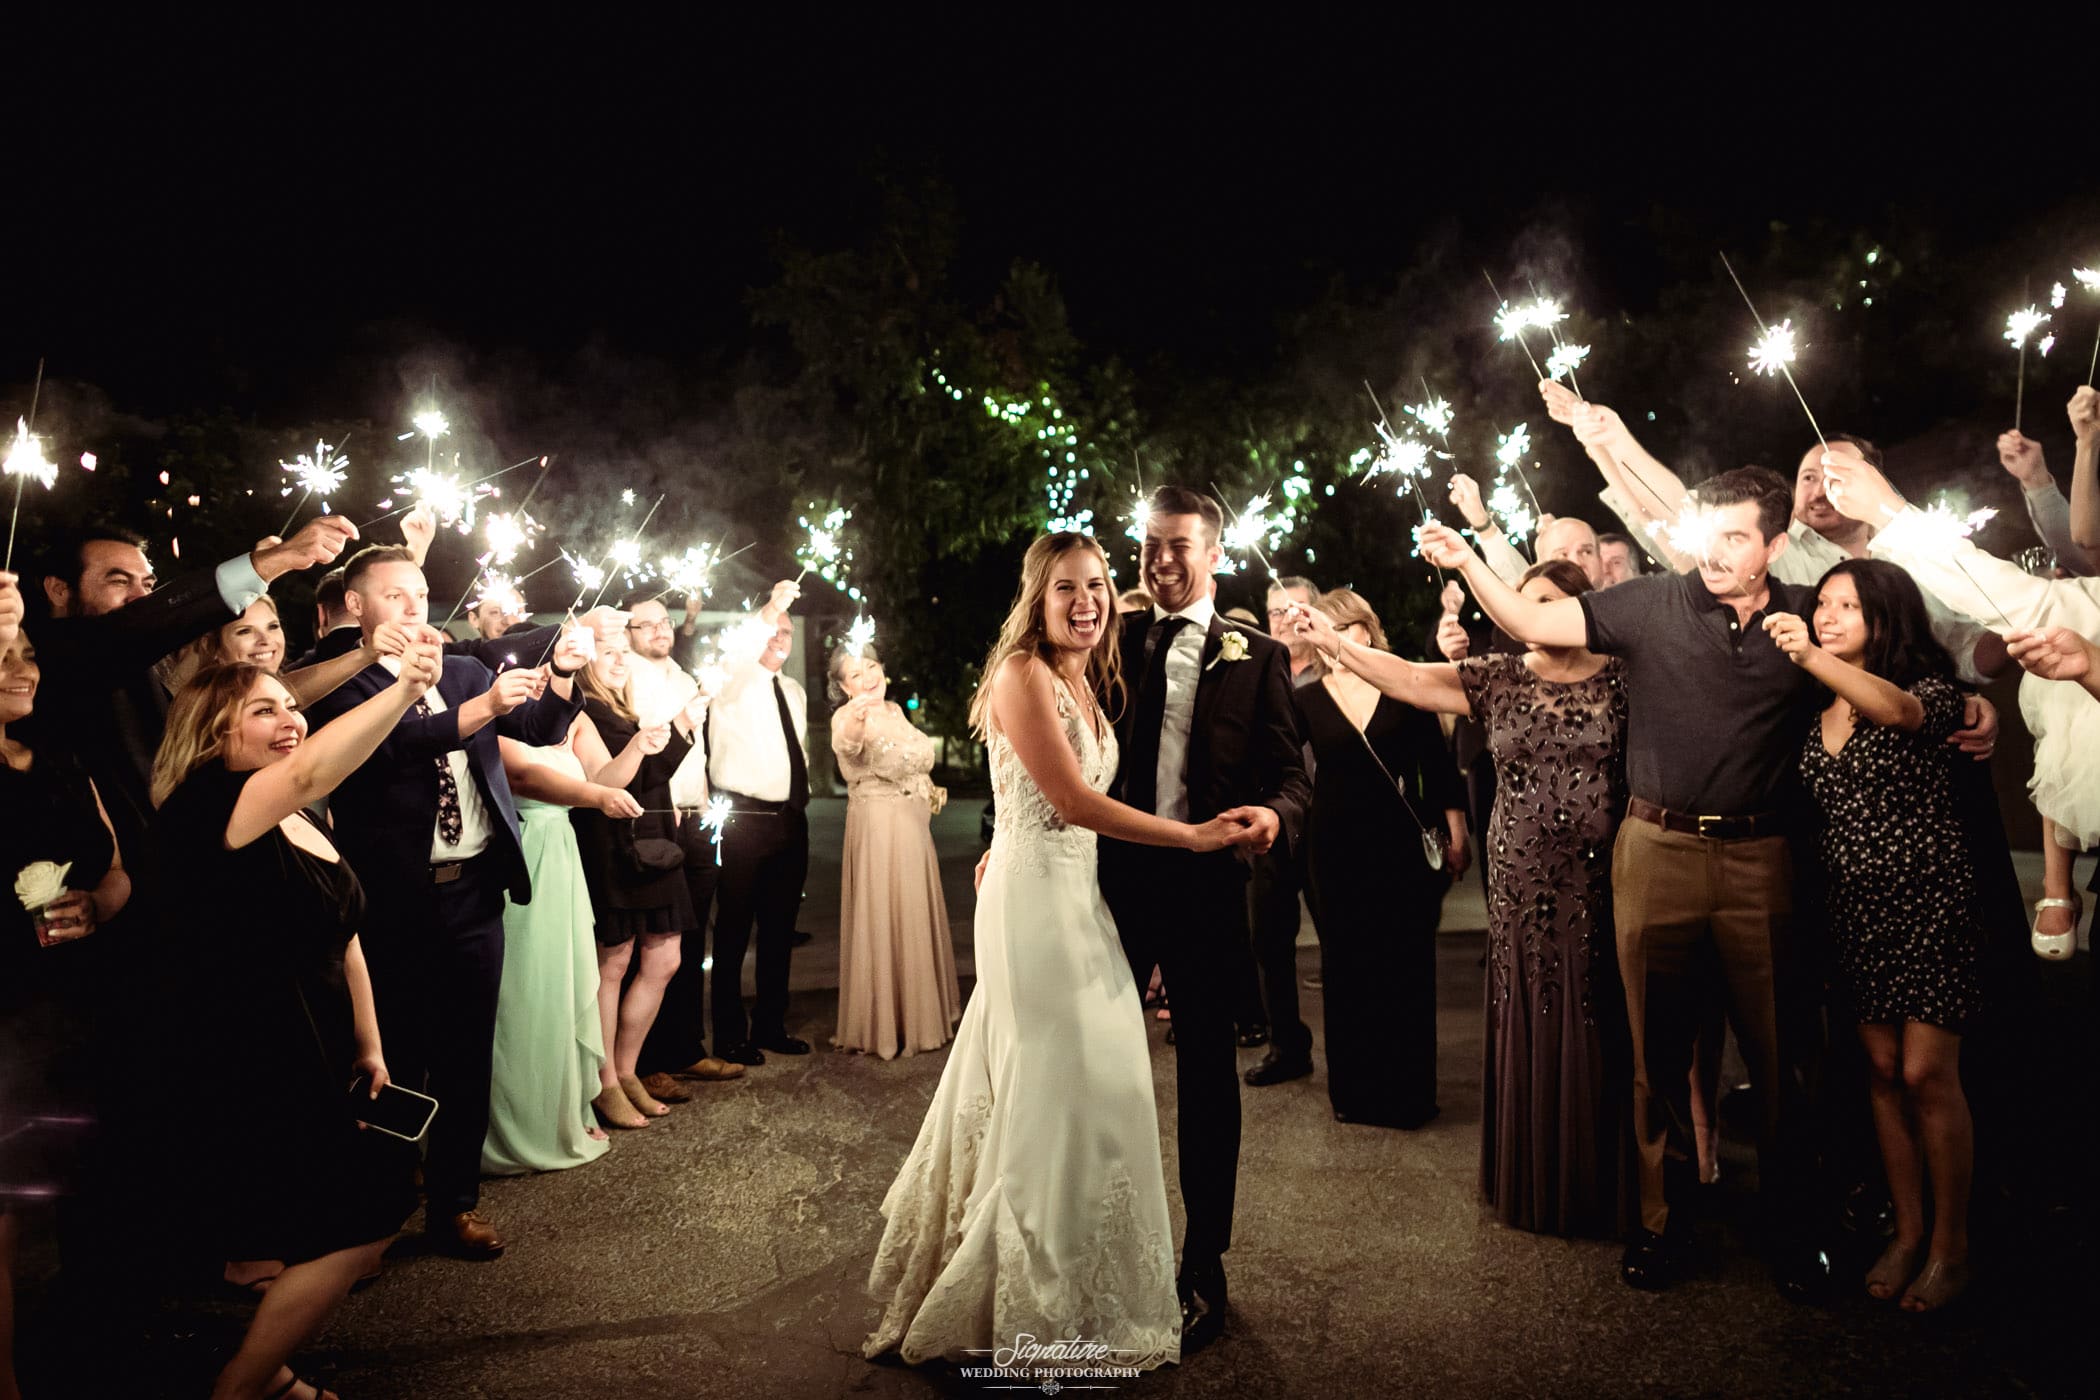 Bride and groom surrounded with wedding guests holding sparklers